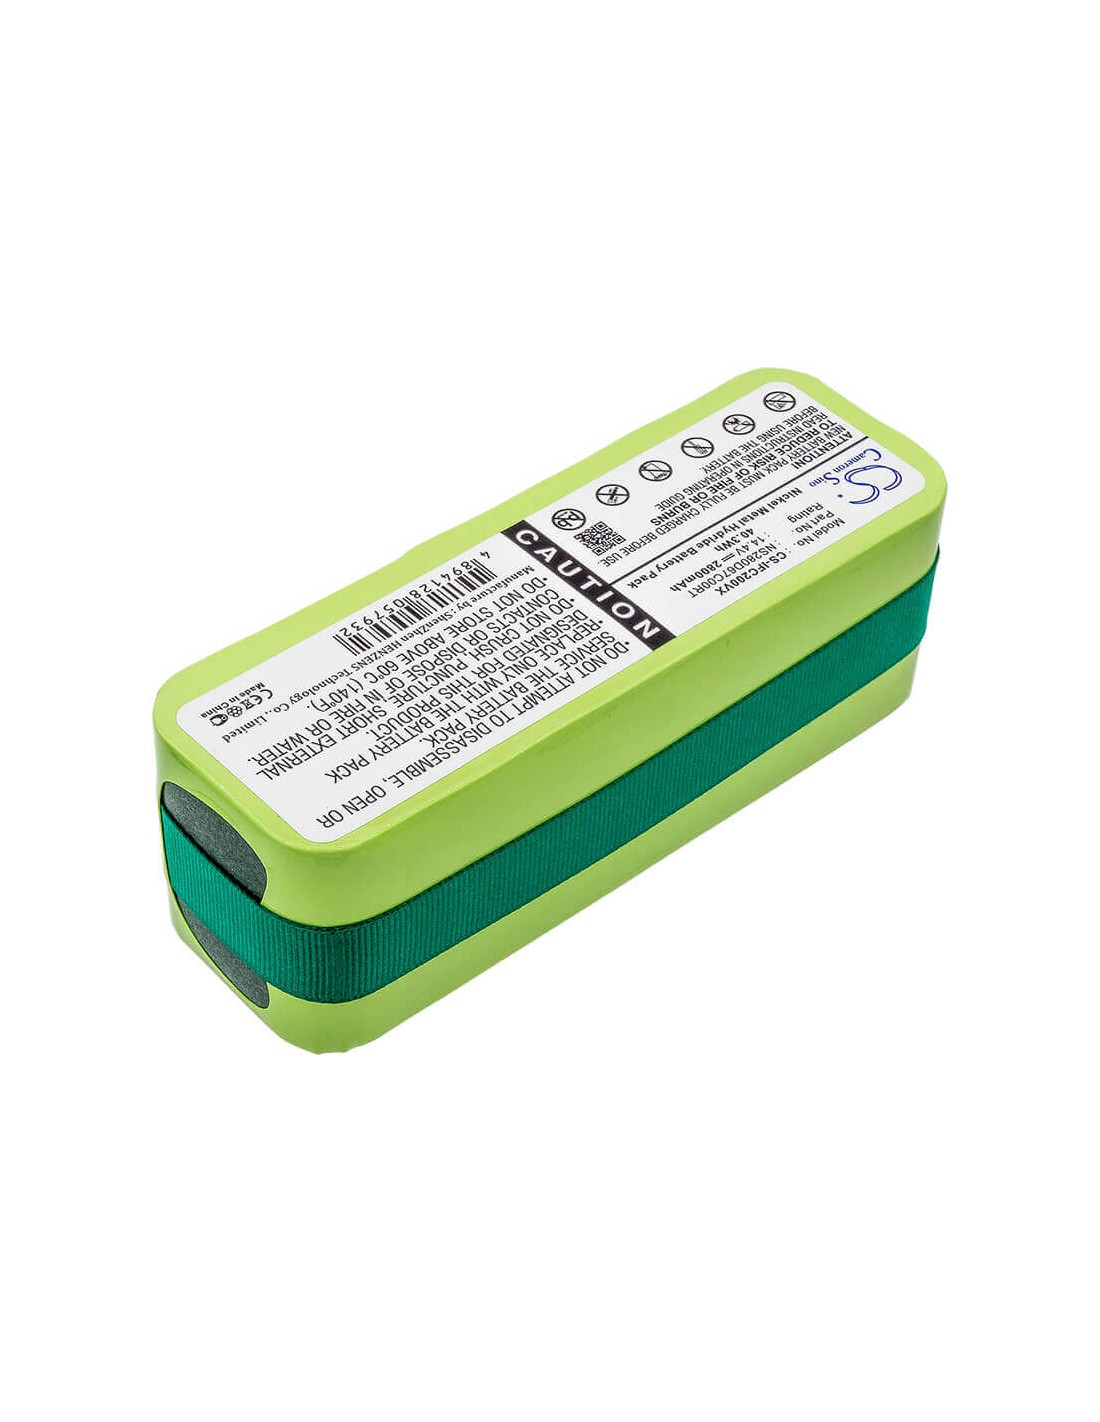 Battery for Infinuvo Cleanmate 365, Cleanmate Qq1, Cleanmate Qq2 14.4V, 2800mAh - 40.32Wh